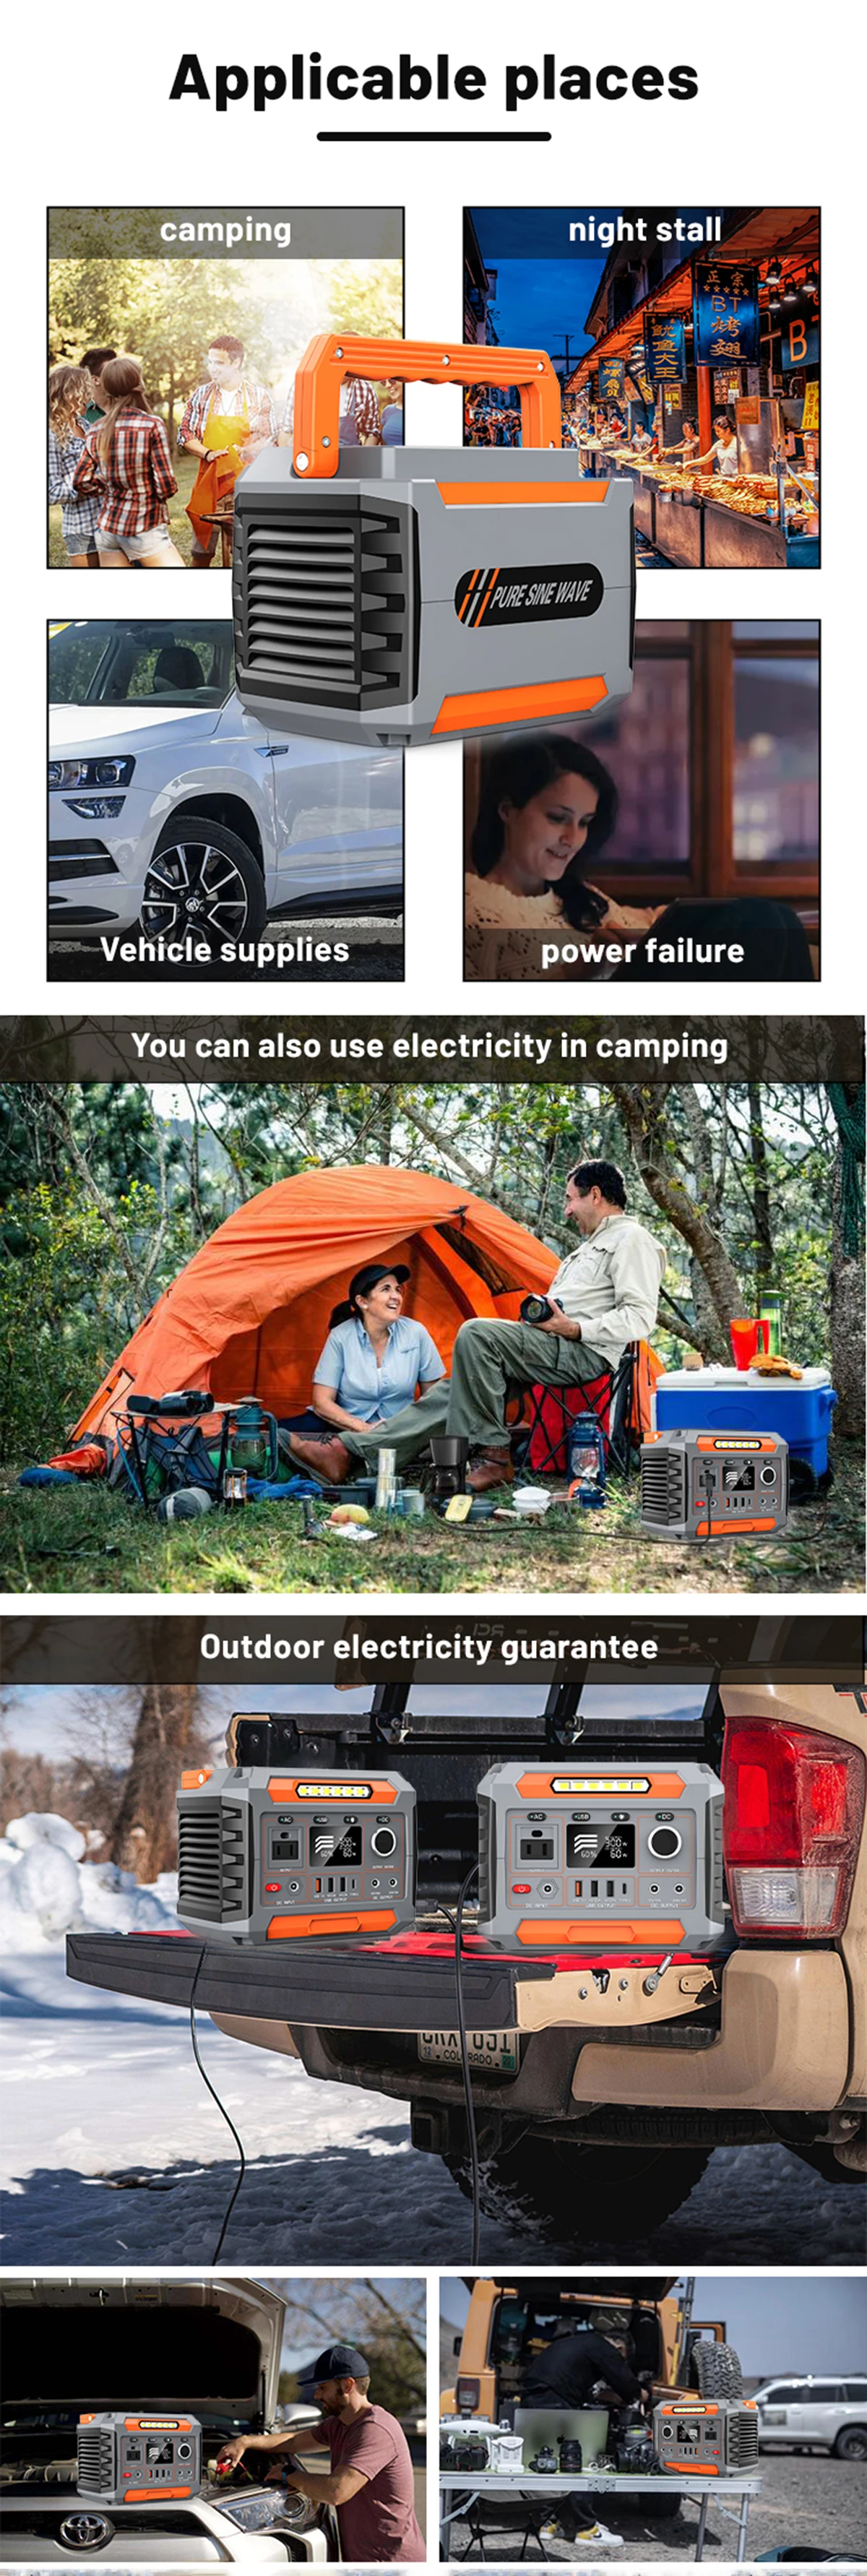 78000mAh Solar Power Pack 288Wh 3.7V Battery Charging Station Portable Generator Emergency Rescue Essential Outdoor Home Storage